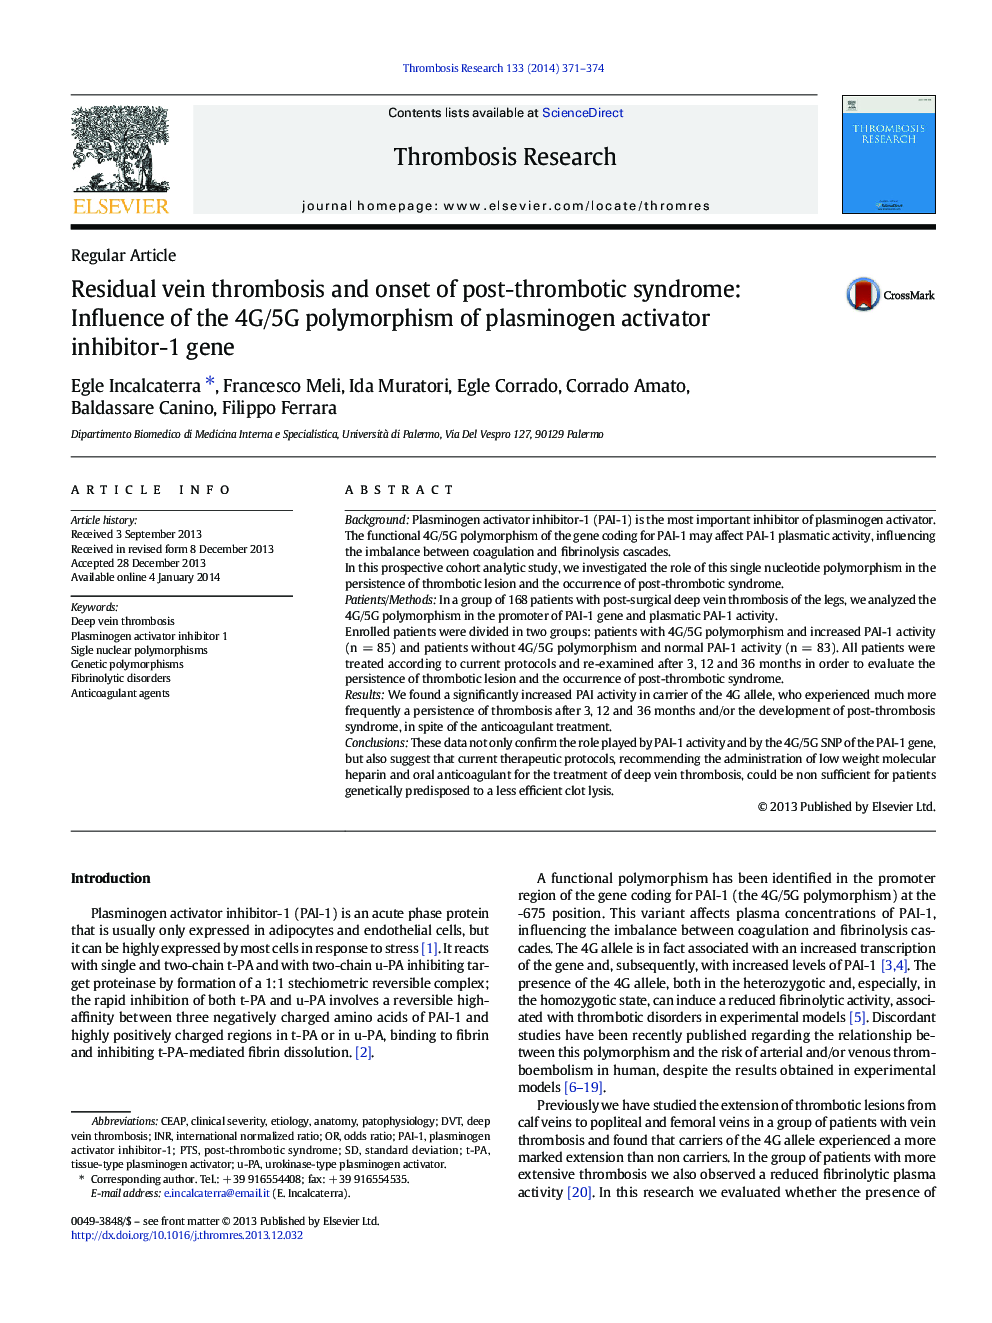 Regular ArticleResidual vein thrombosis and onset of post-thrombotic syndrome: Influence of the 4G/5G polymorphism of plasminogen activator inhibitor-1 gene